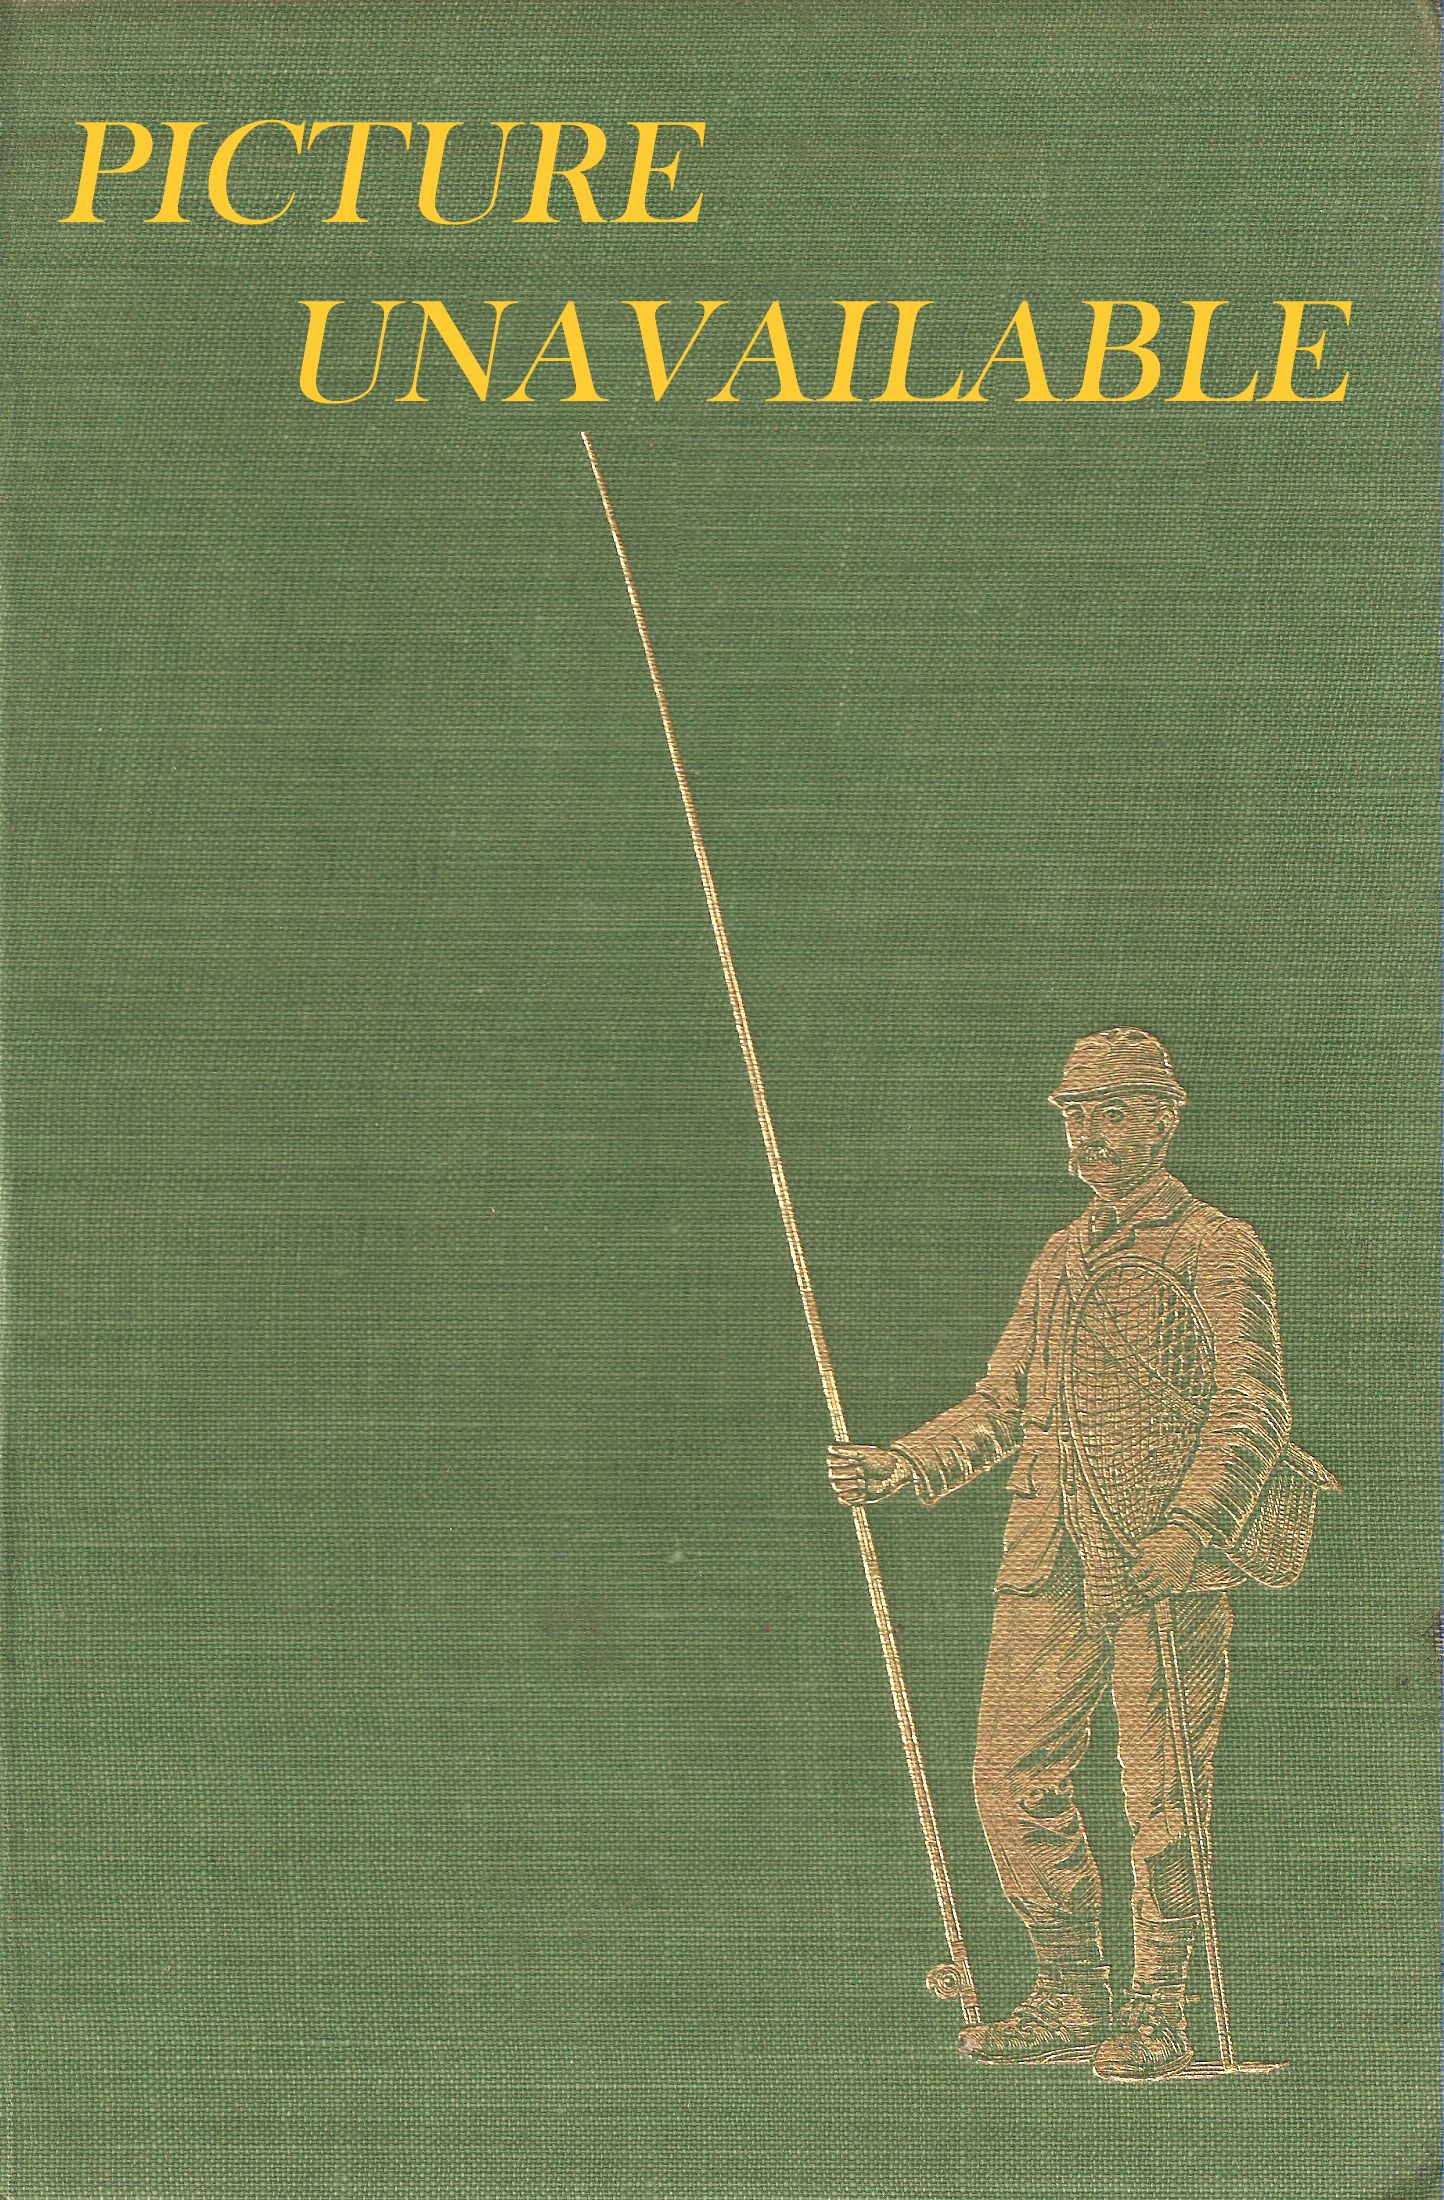 ANGLING IN WILDEST SCOTLAND. By R. MacDonald Robertson, F.S.A. (Scot.).